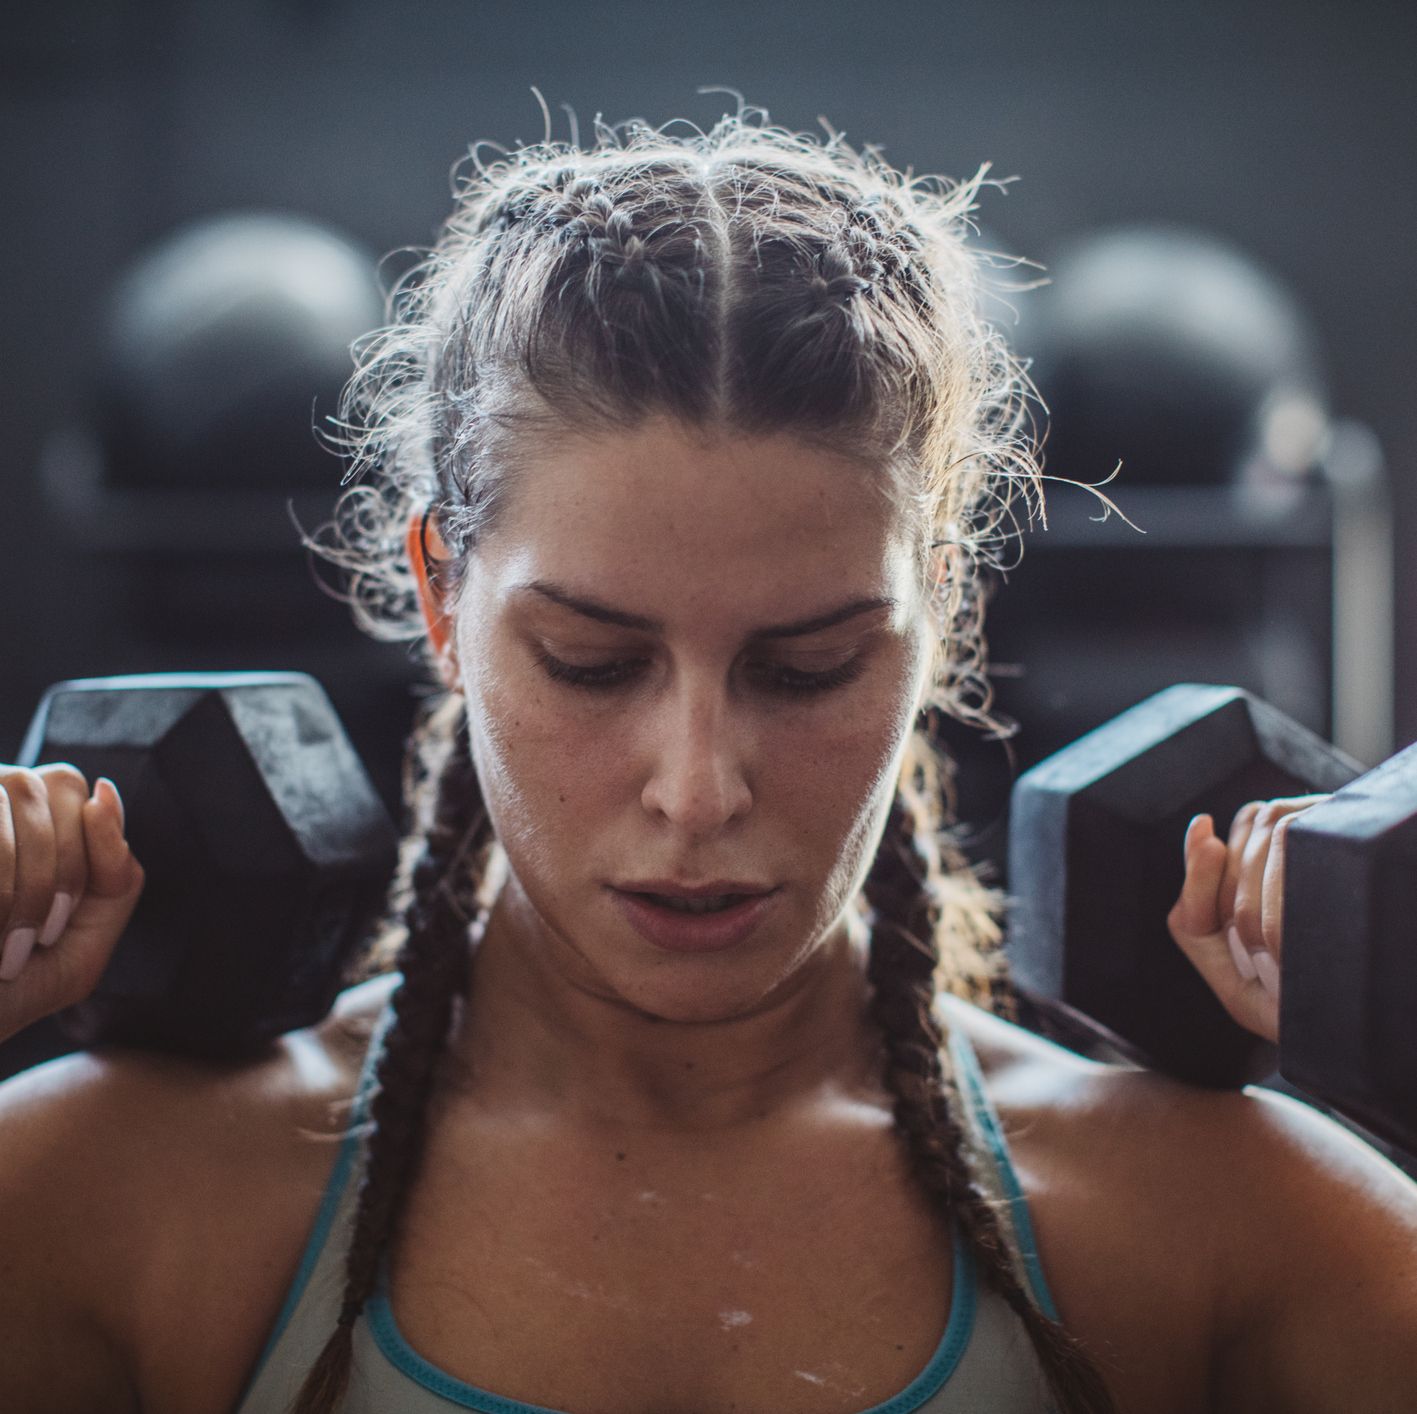 Female Muscle Growth: Tips for Strength & Fitness